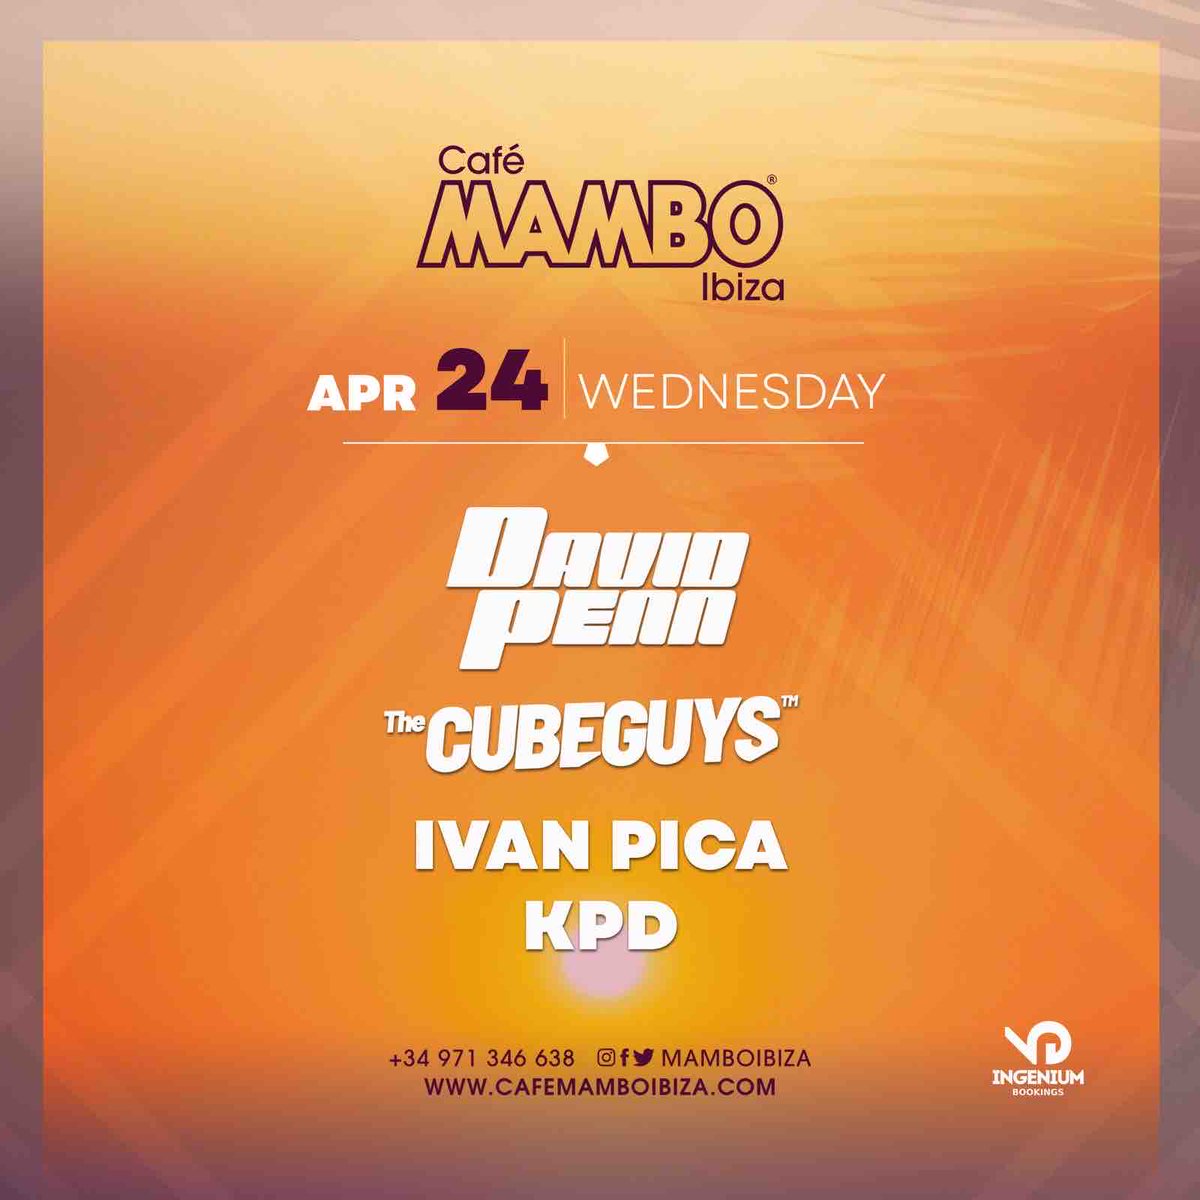 📣 MAJOR ANNOUNCEMENT!📣 This Wednesday here at Café Mambo we’ve got @djdavidpenn @thecubeguys @ivan_pica_ and @kpd_official all here in the iconic booth! You won’t want to miss any of the action! 🎉 Which of them have you seen most recently? Tell us below! 🤩